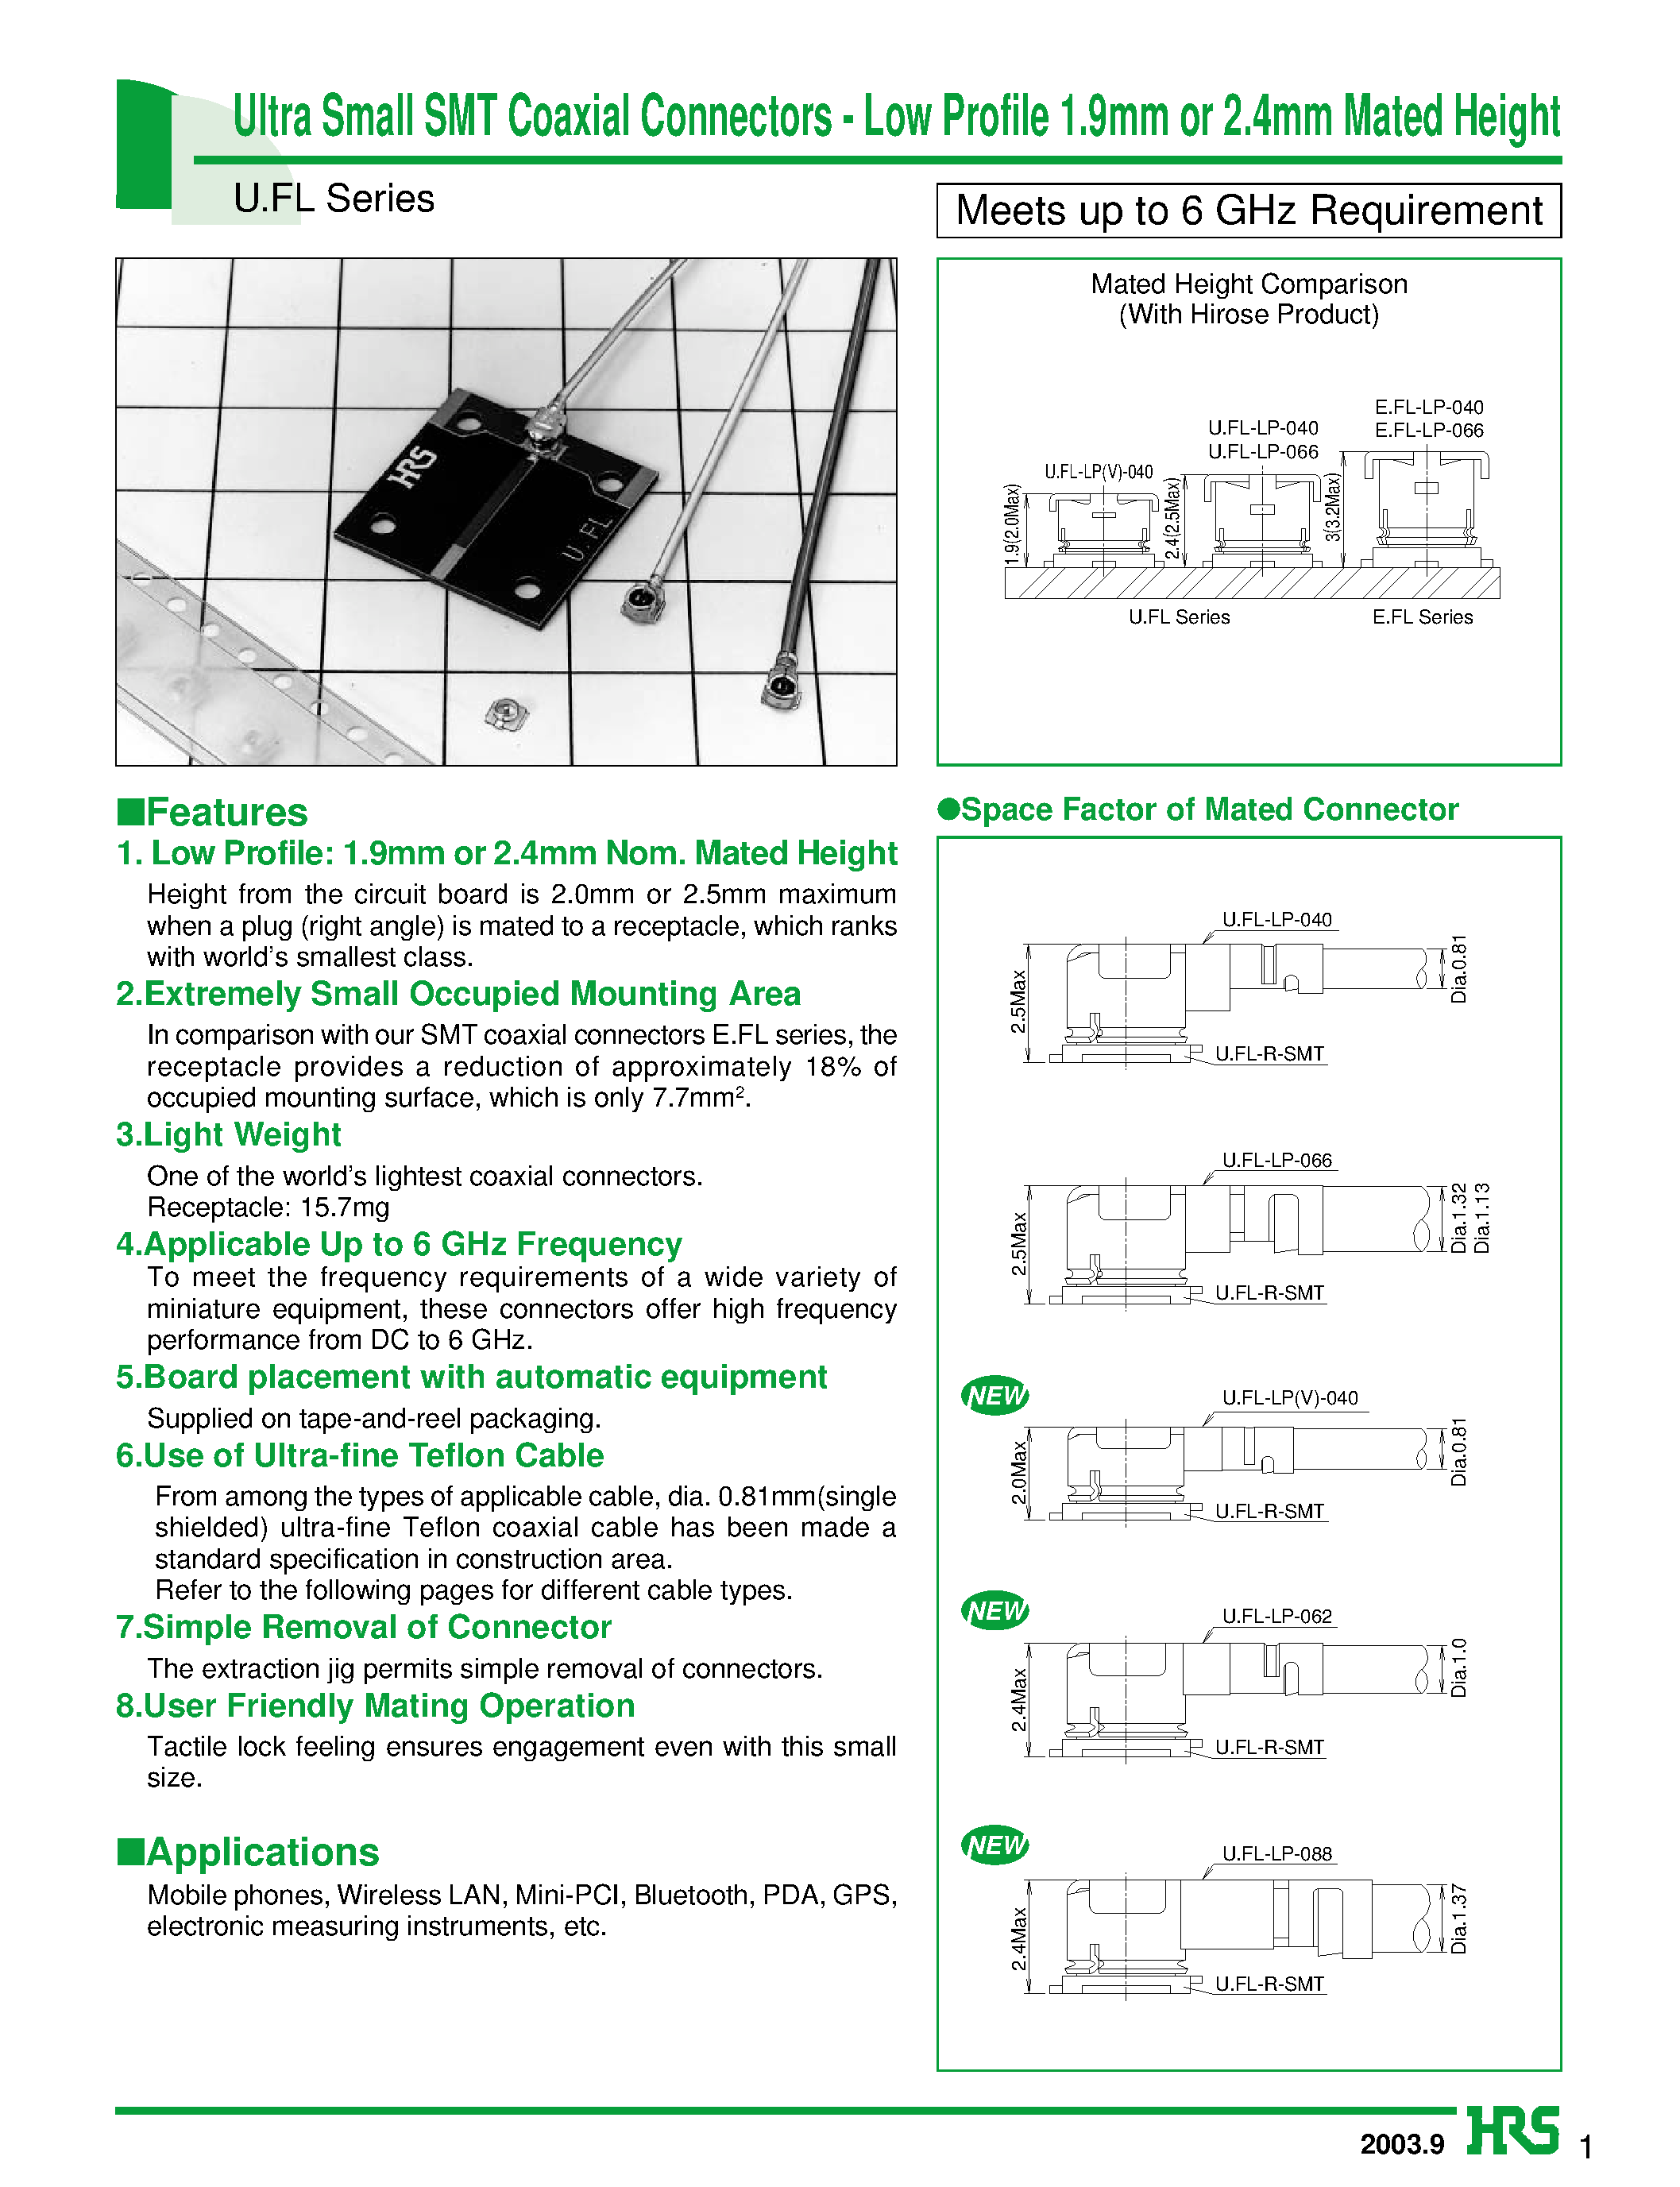 Datasheet HRMJ-U.FLP-ST1 - Ultra Small SMT Coaxial Connectors - Low Profile 1.9mm or 2.4mm Mated Height page 1